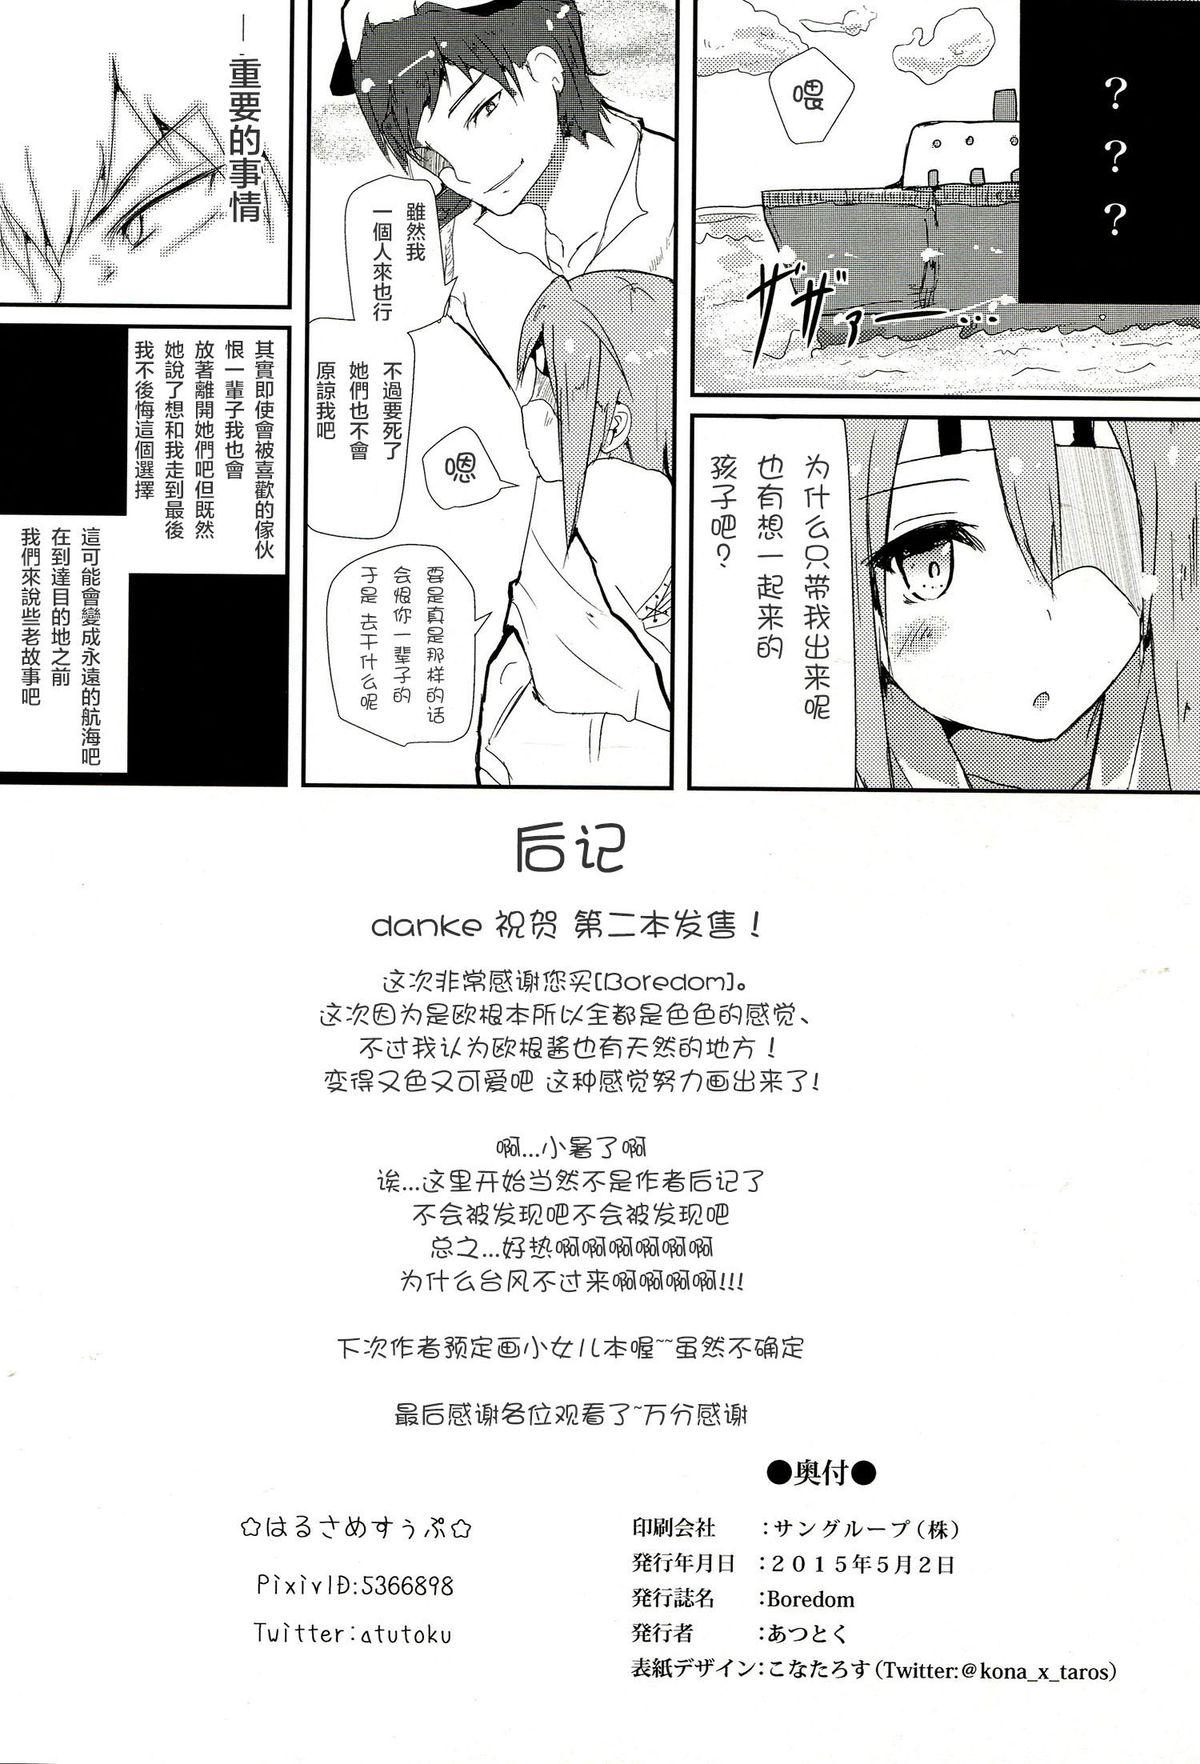 Deep Boredom - Kantai collection Old And Young - Page 26